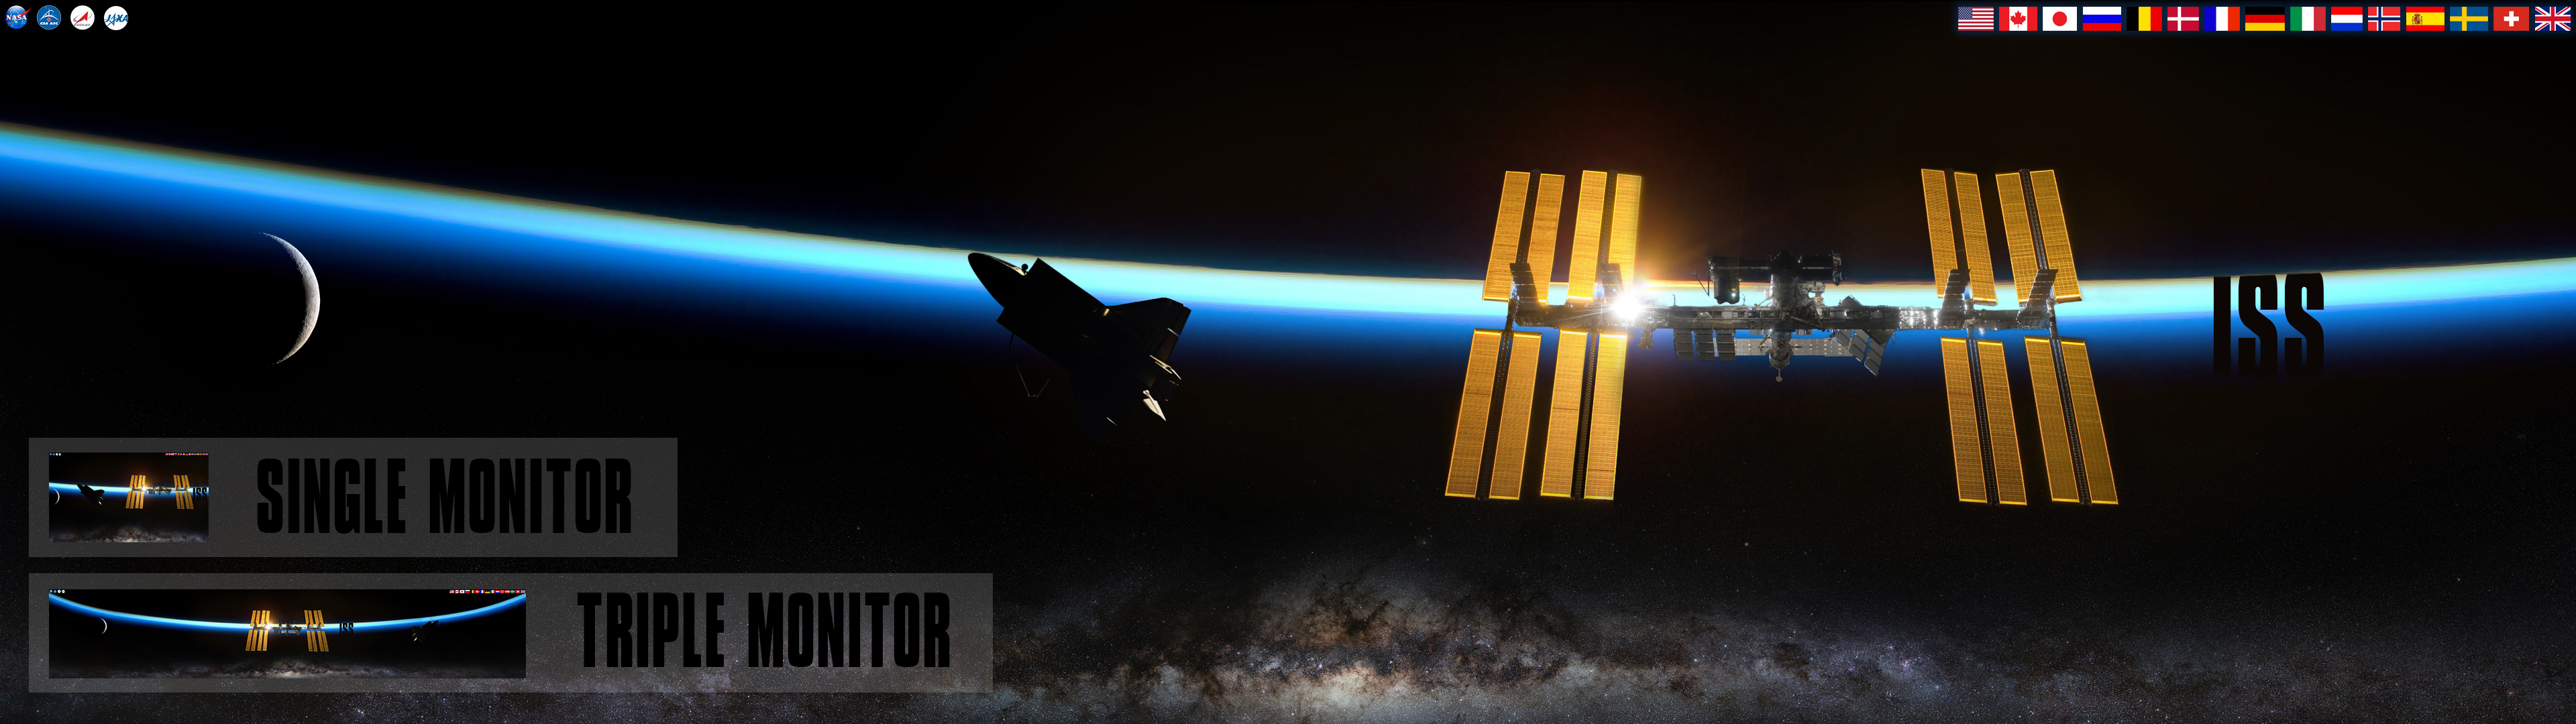 Nasa Iss International Space Station Wallpaper By